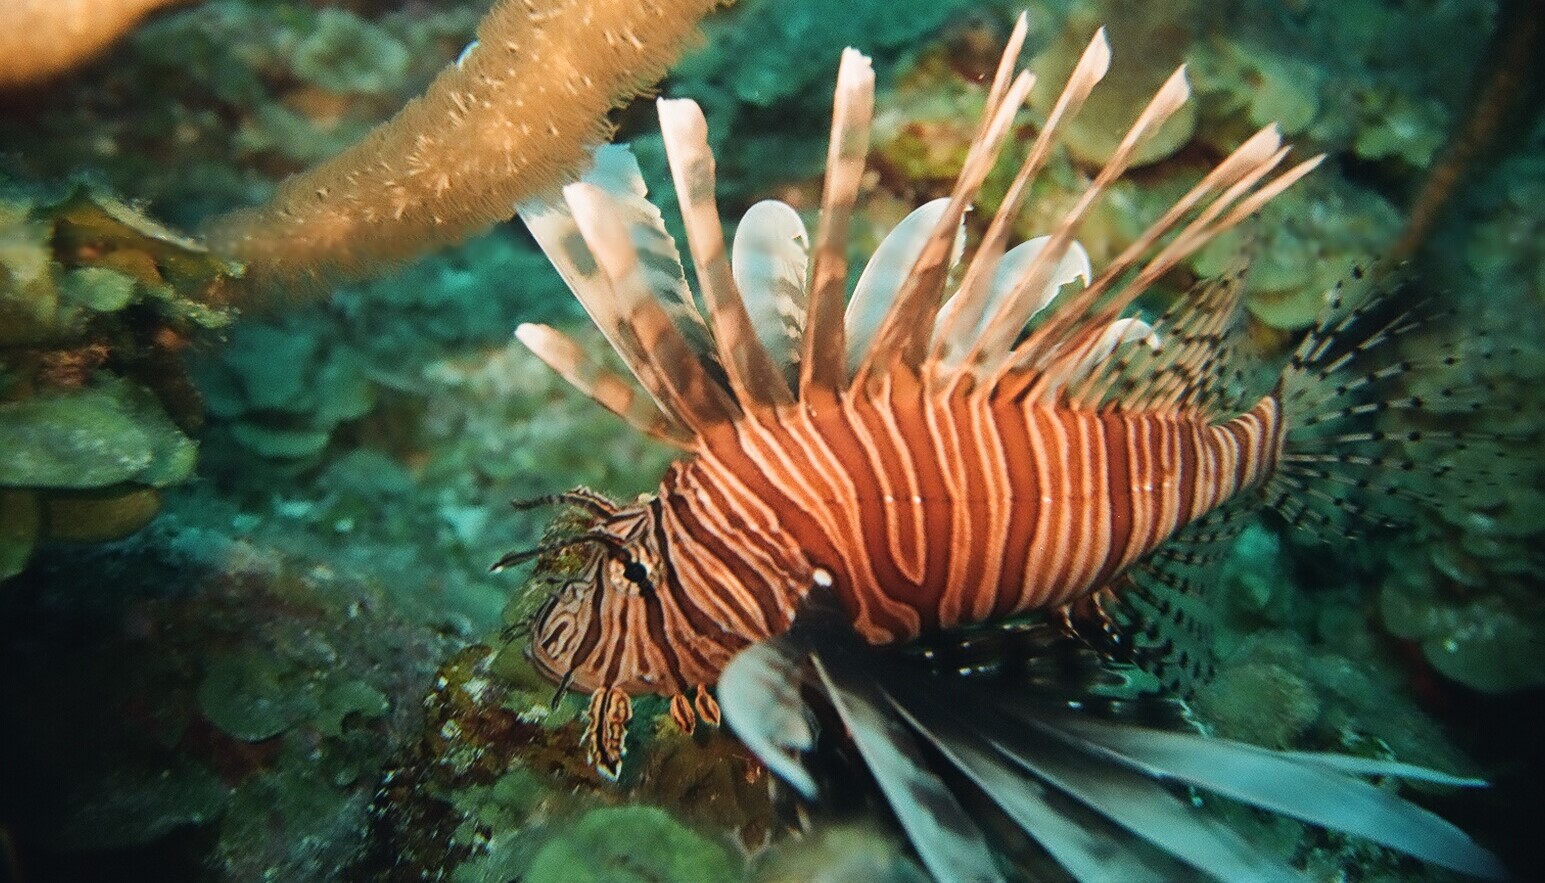 Lionfish (*Pterois volitans*) in a Mexican coral reef